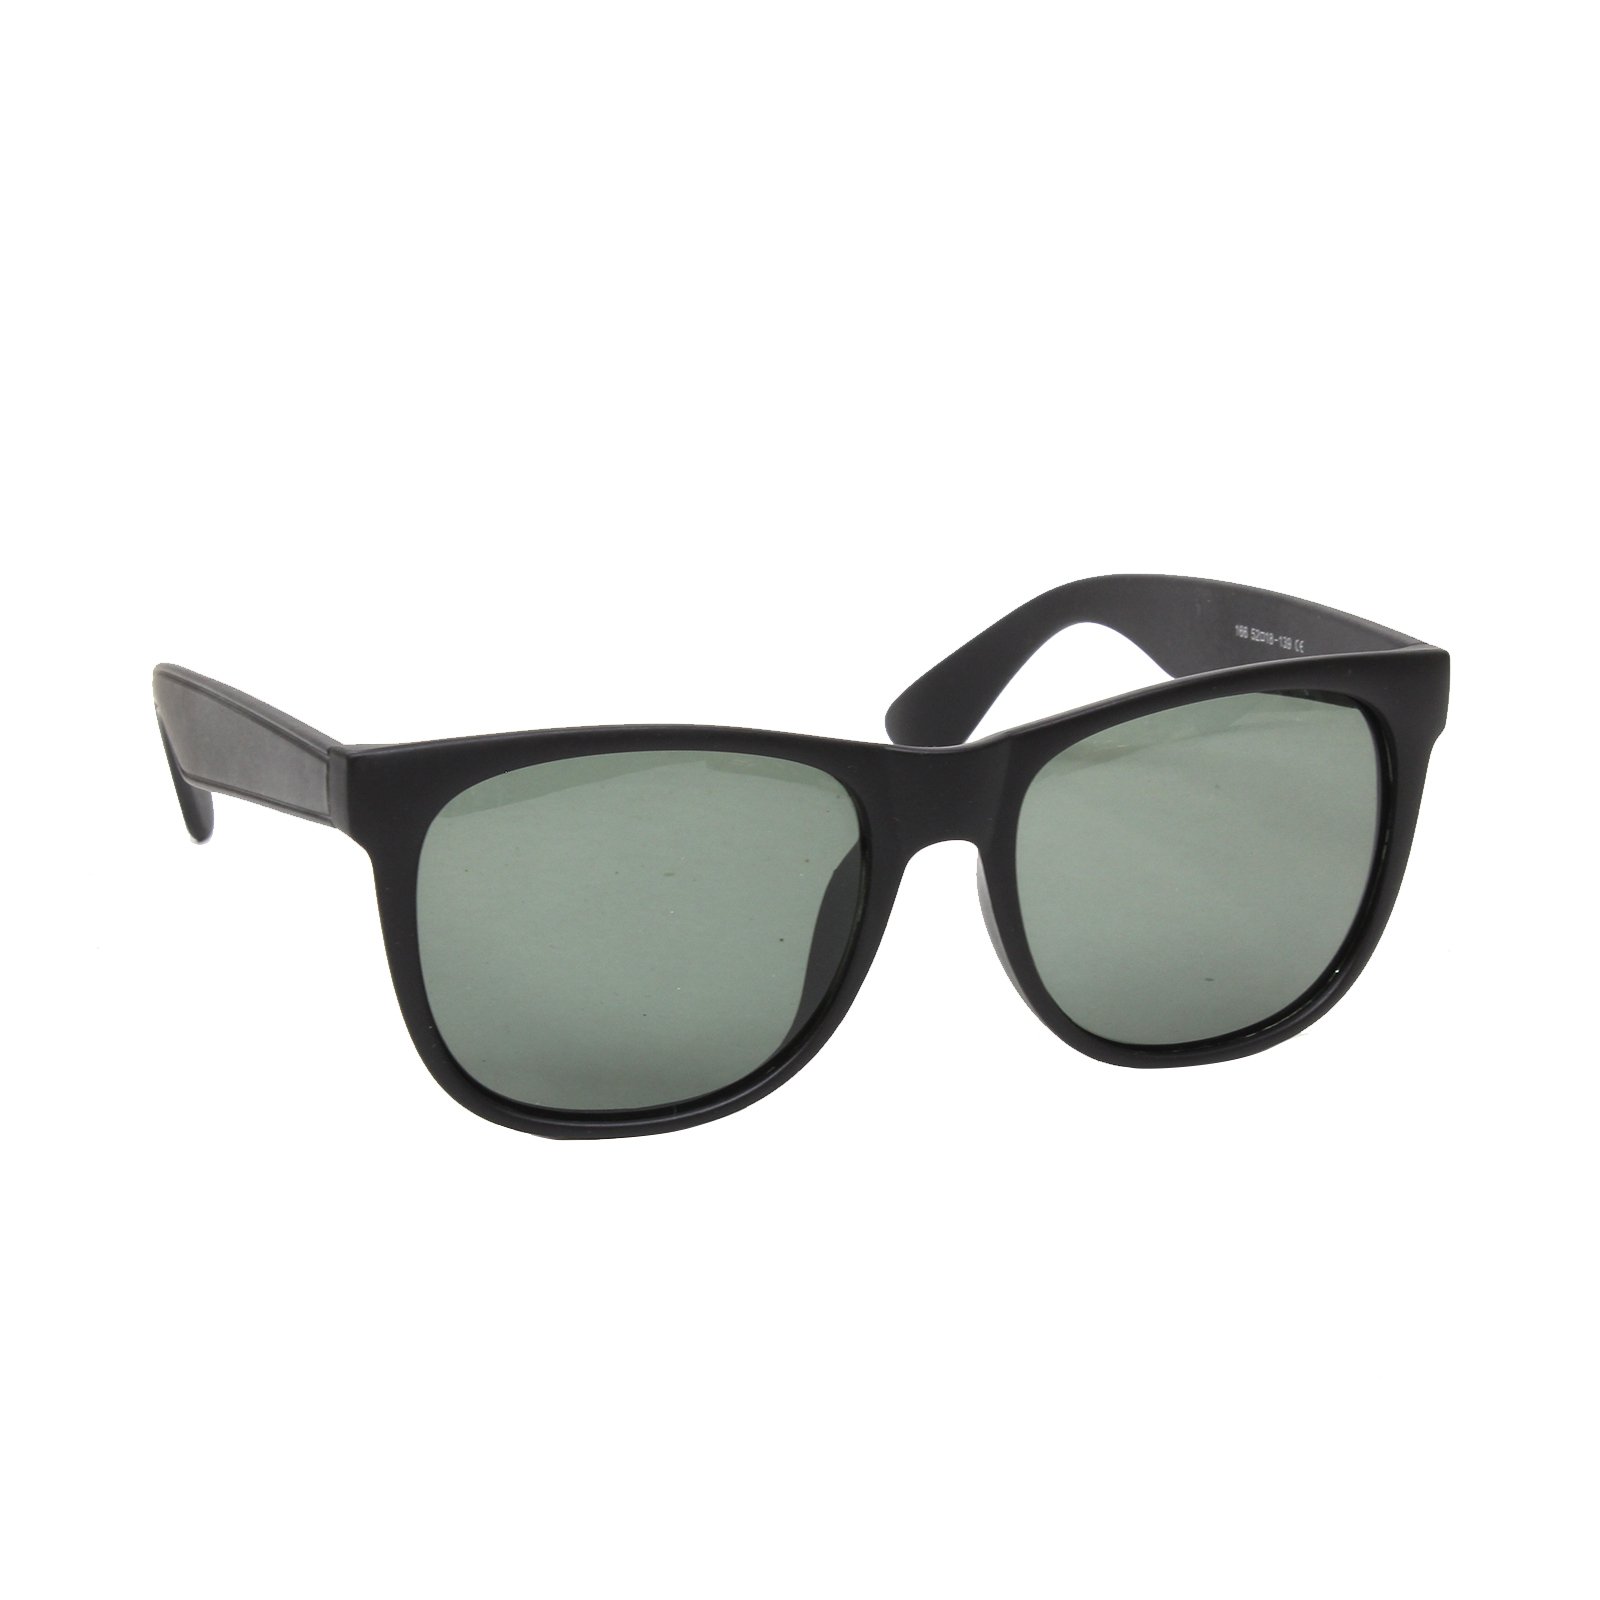 Model 166 Sunglasses - Look Fantastic and Protect your Eyes with our ...